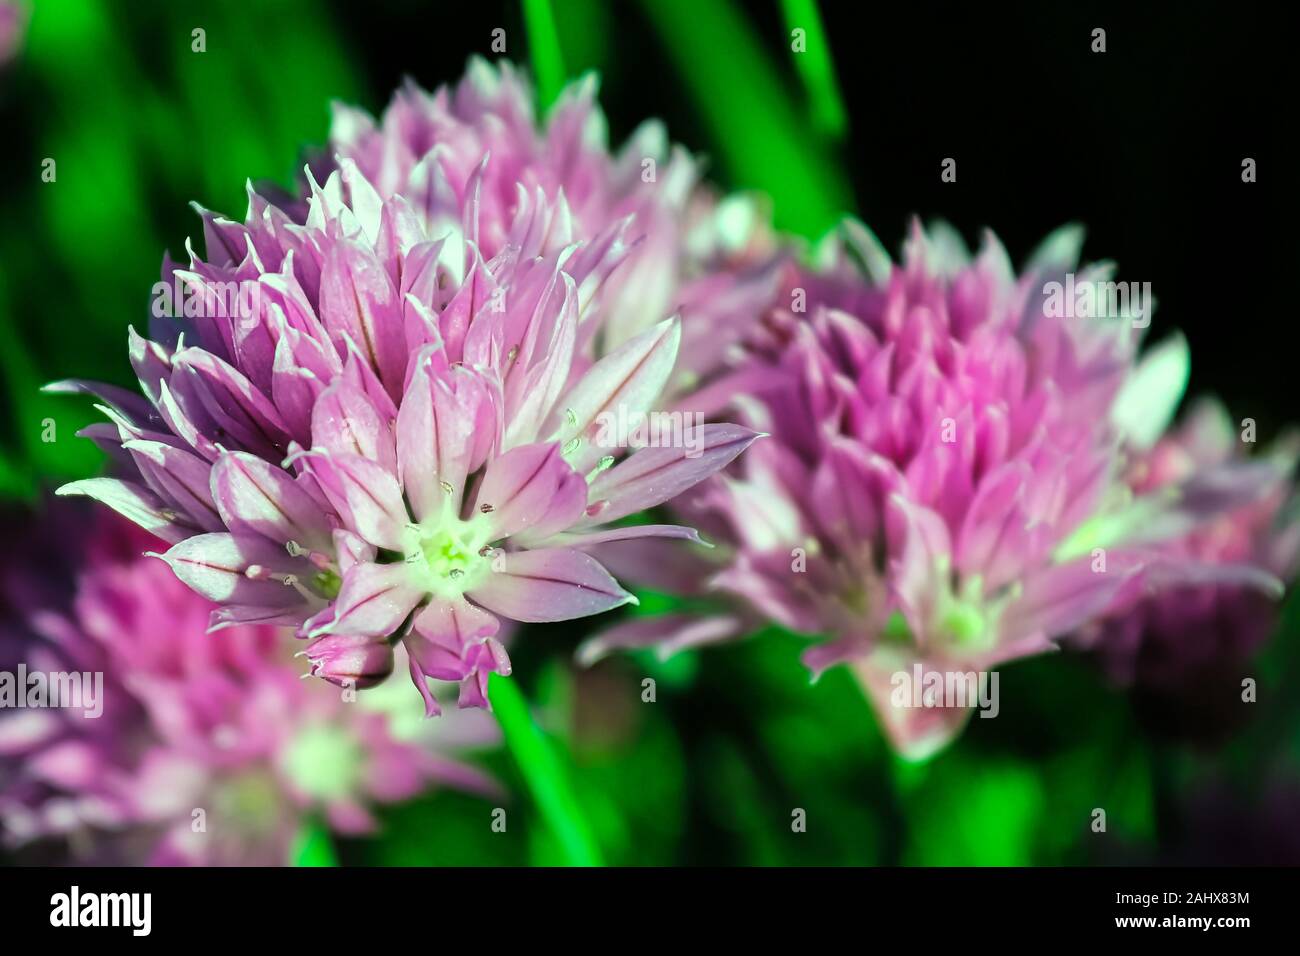 Closeup of fresh pink garden chive blossoms Stock Photo